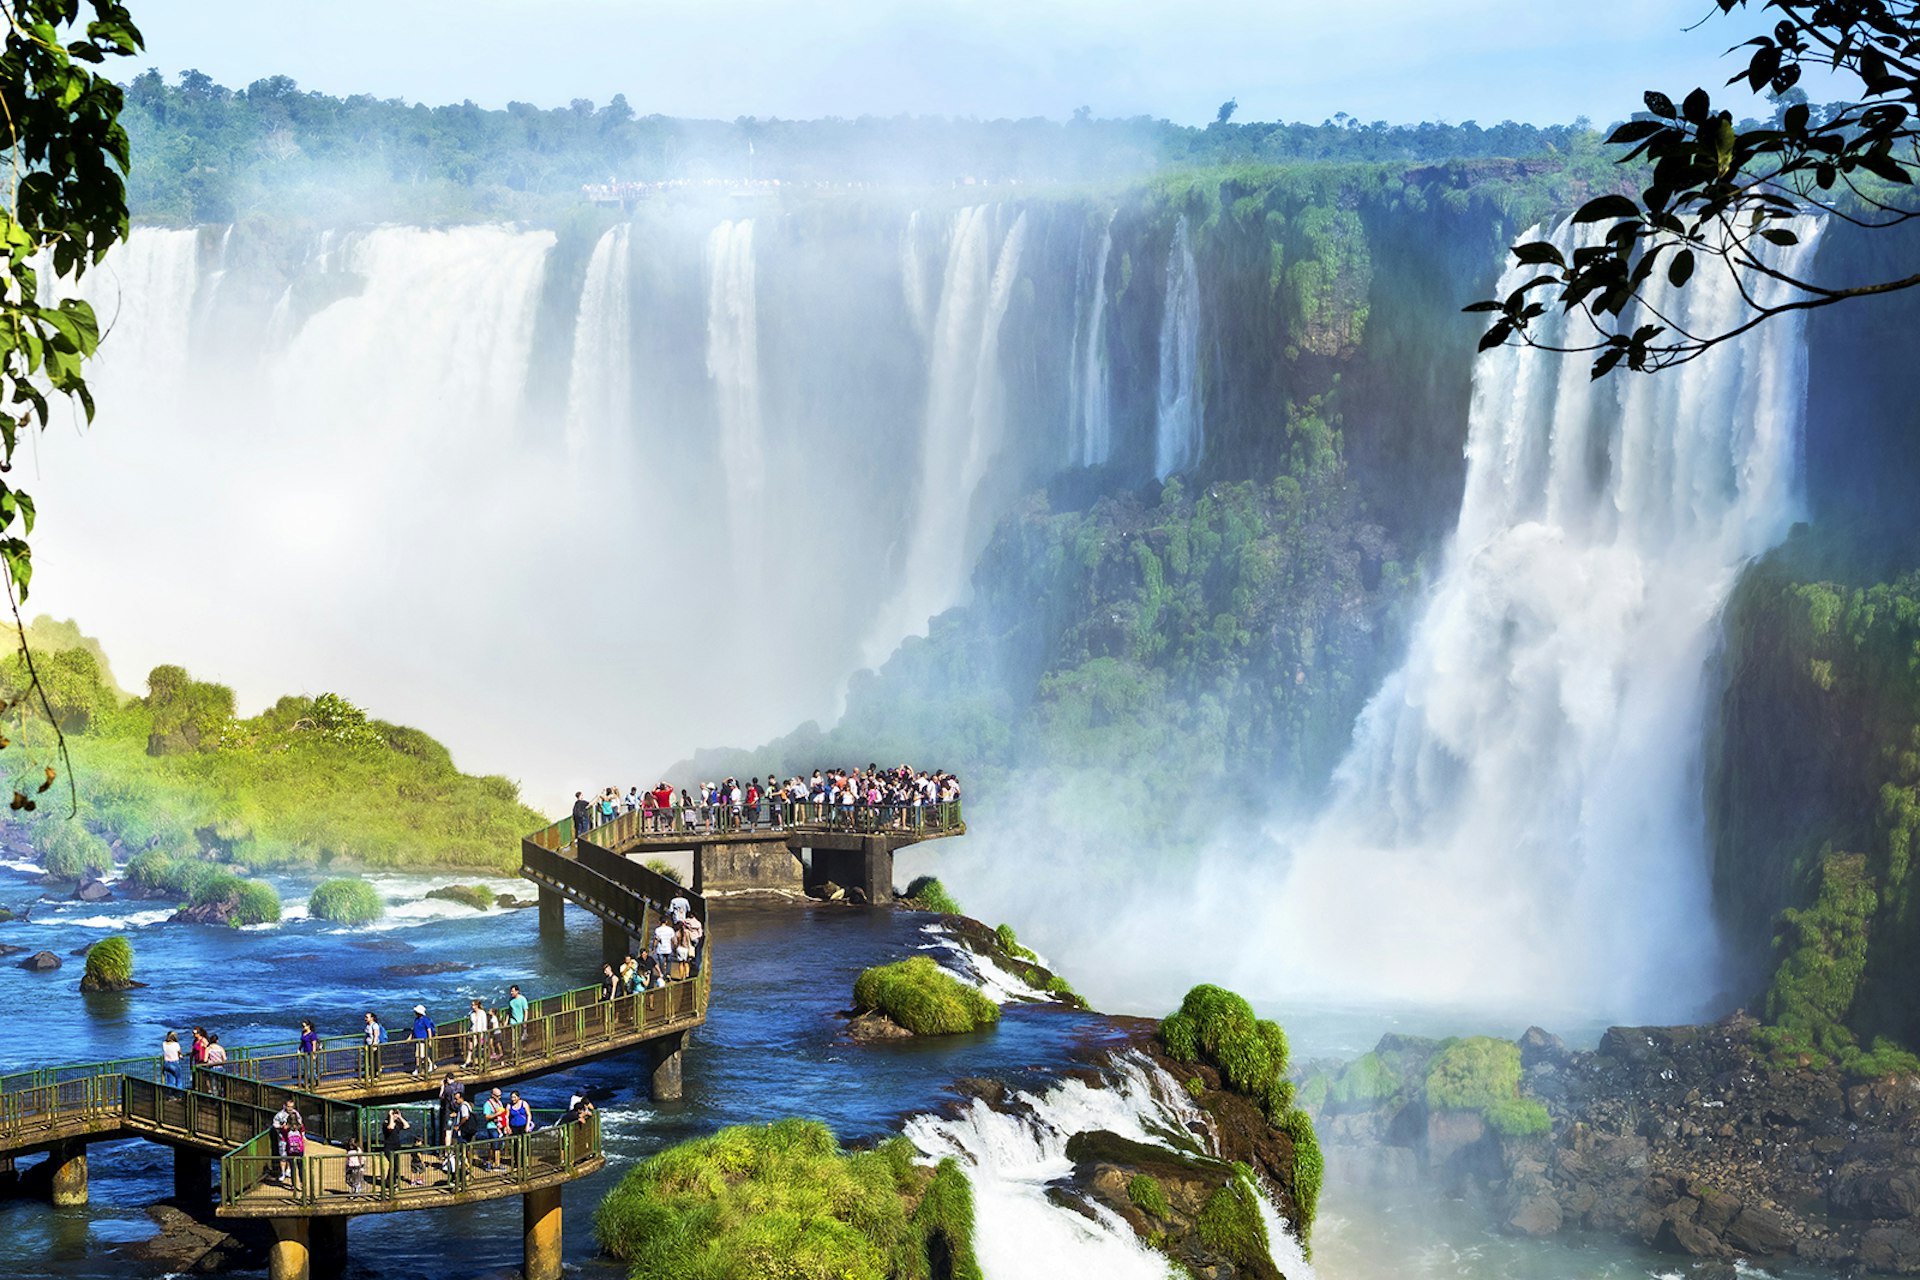 Features - Iguazu Falls, on the border of Argentina and Brazil